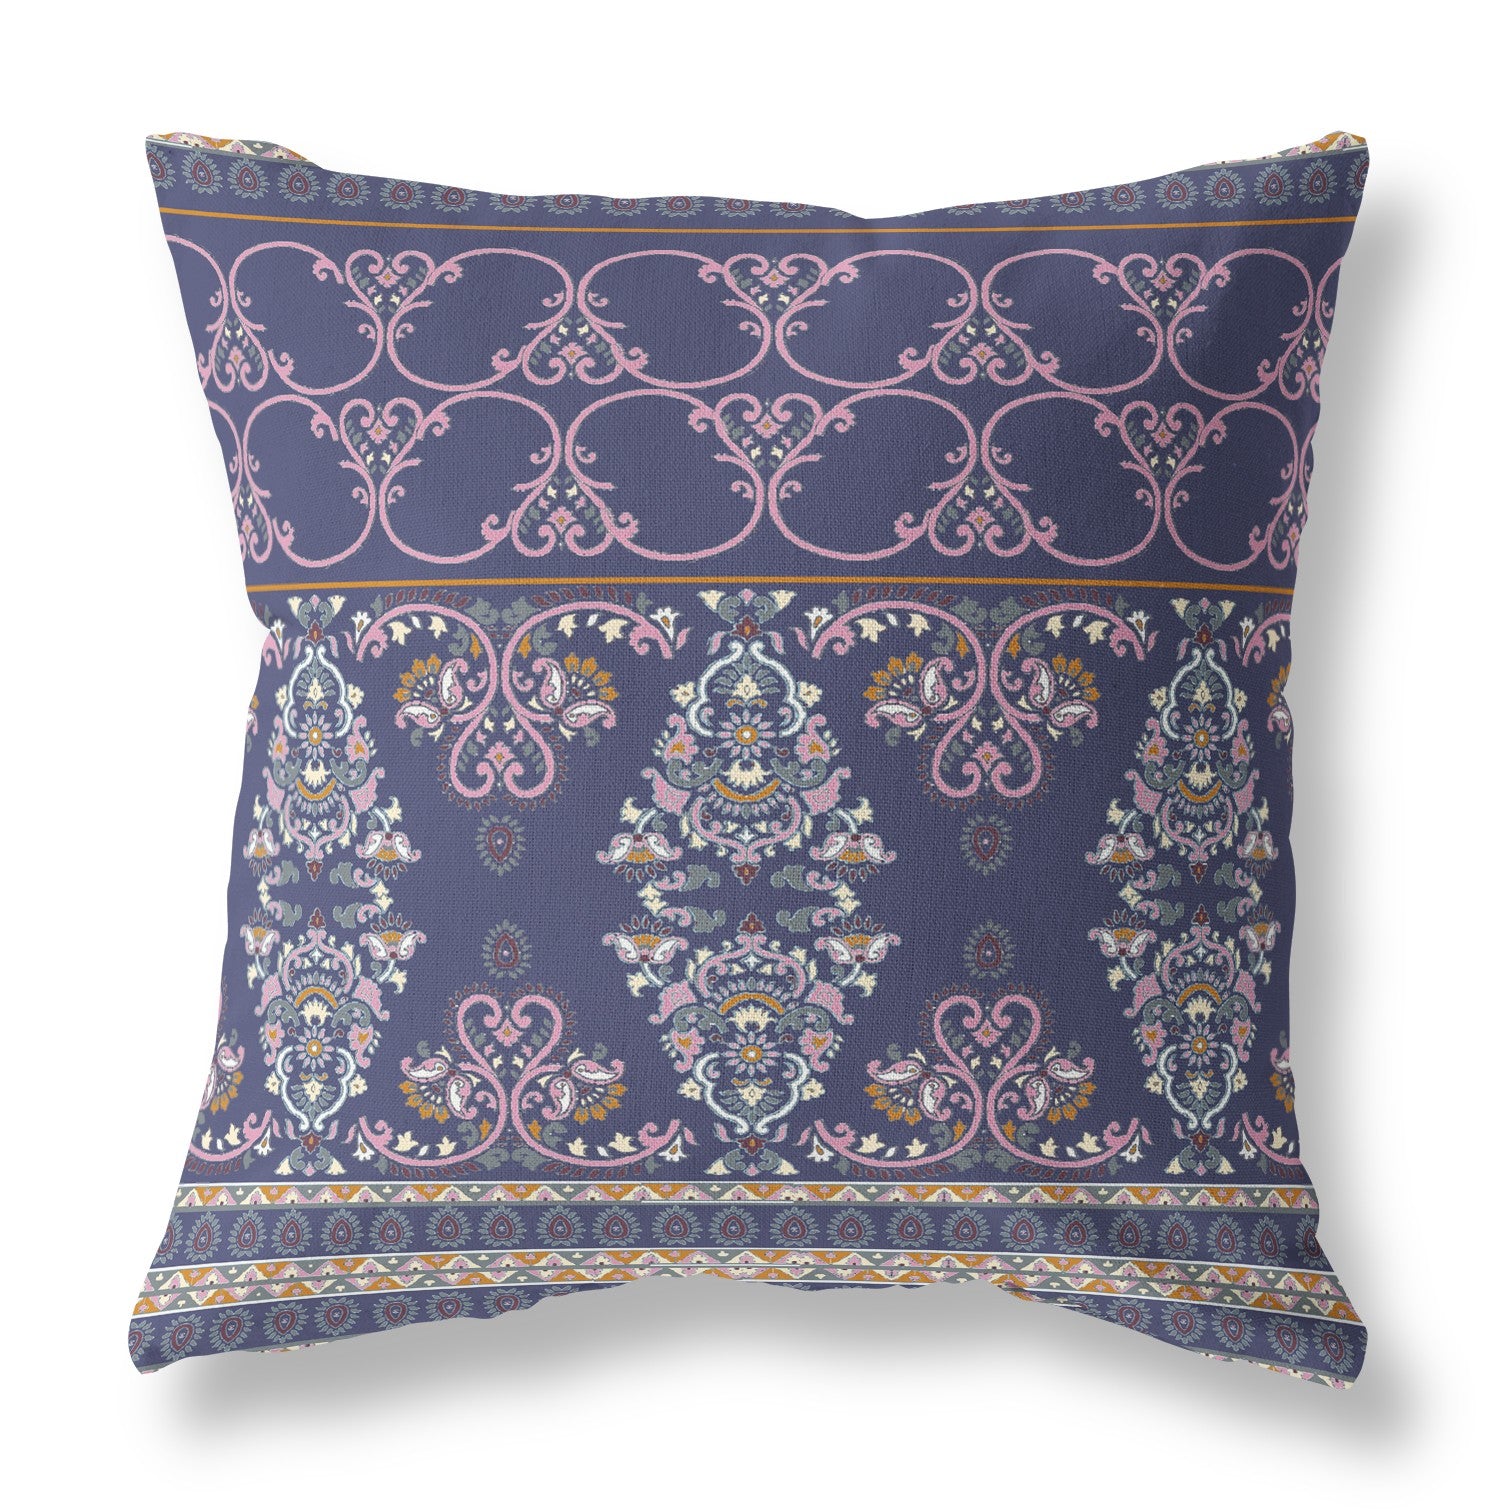 18" X 18" Blue And Pink Zippered Damask Indoor Outdoor Throw Pillow